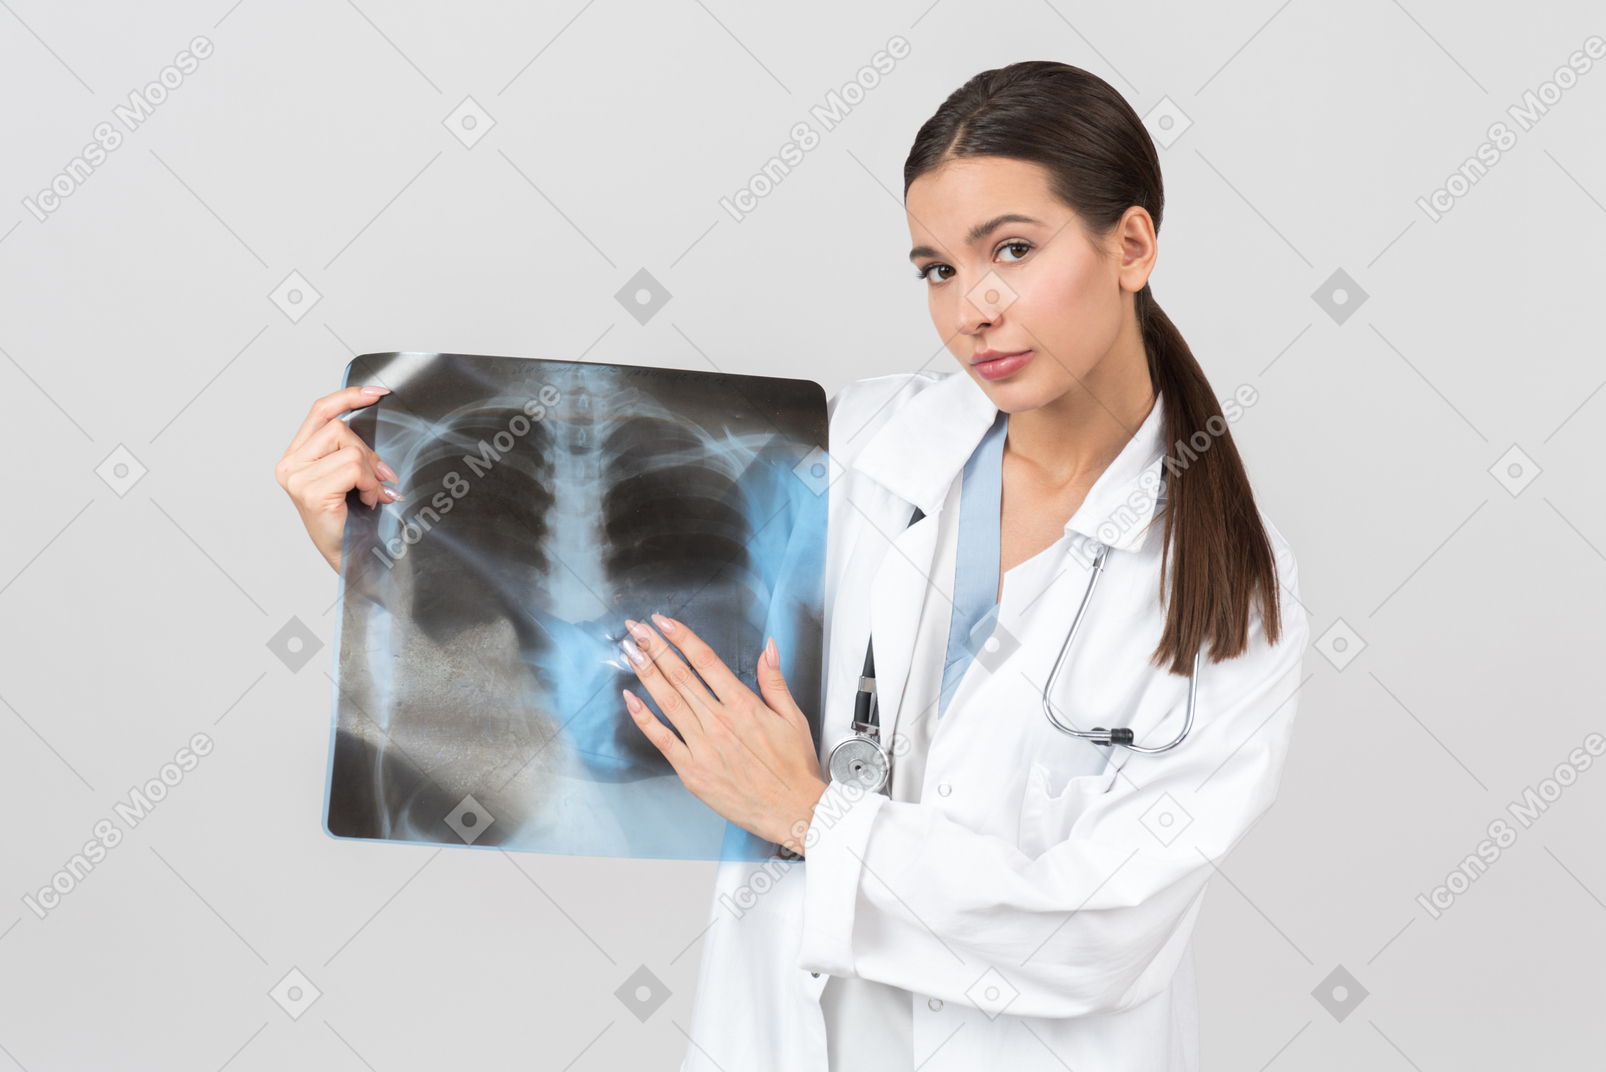 Checking x-ray scan again before examining patient